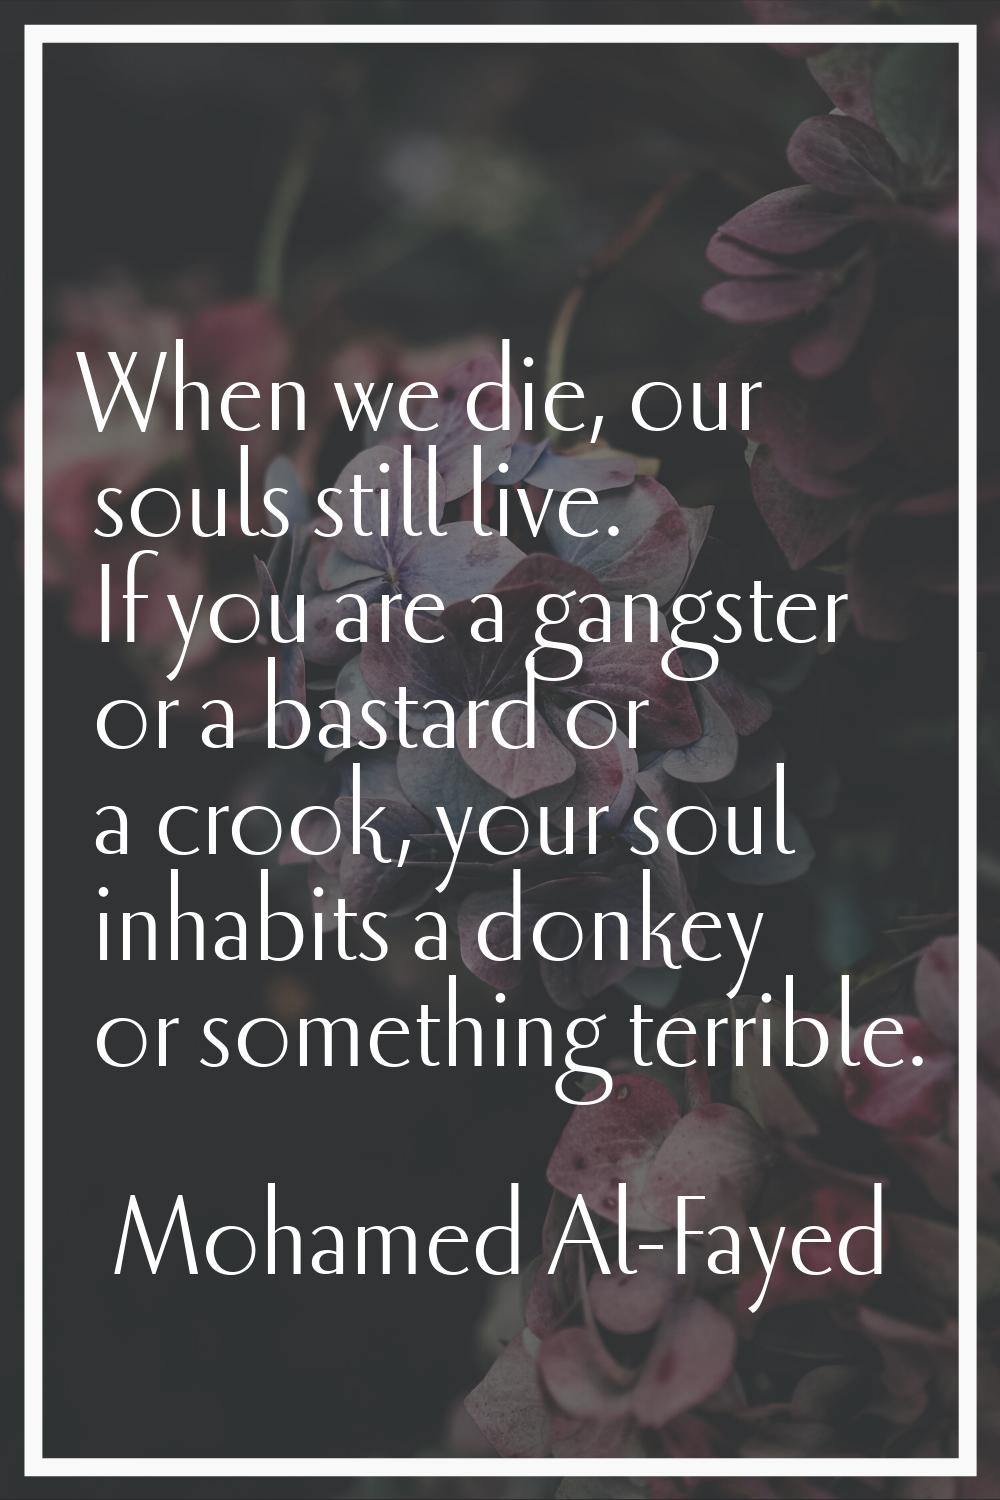 When we die, our souls still live. If you are a gangster or a bastard or a crook, your soul inhabit